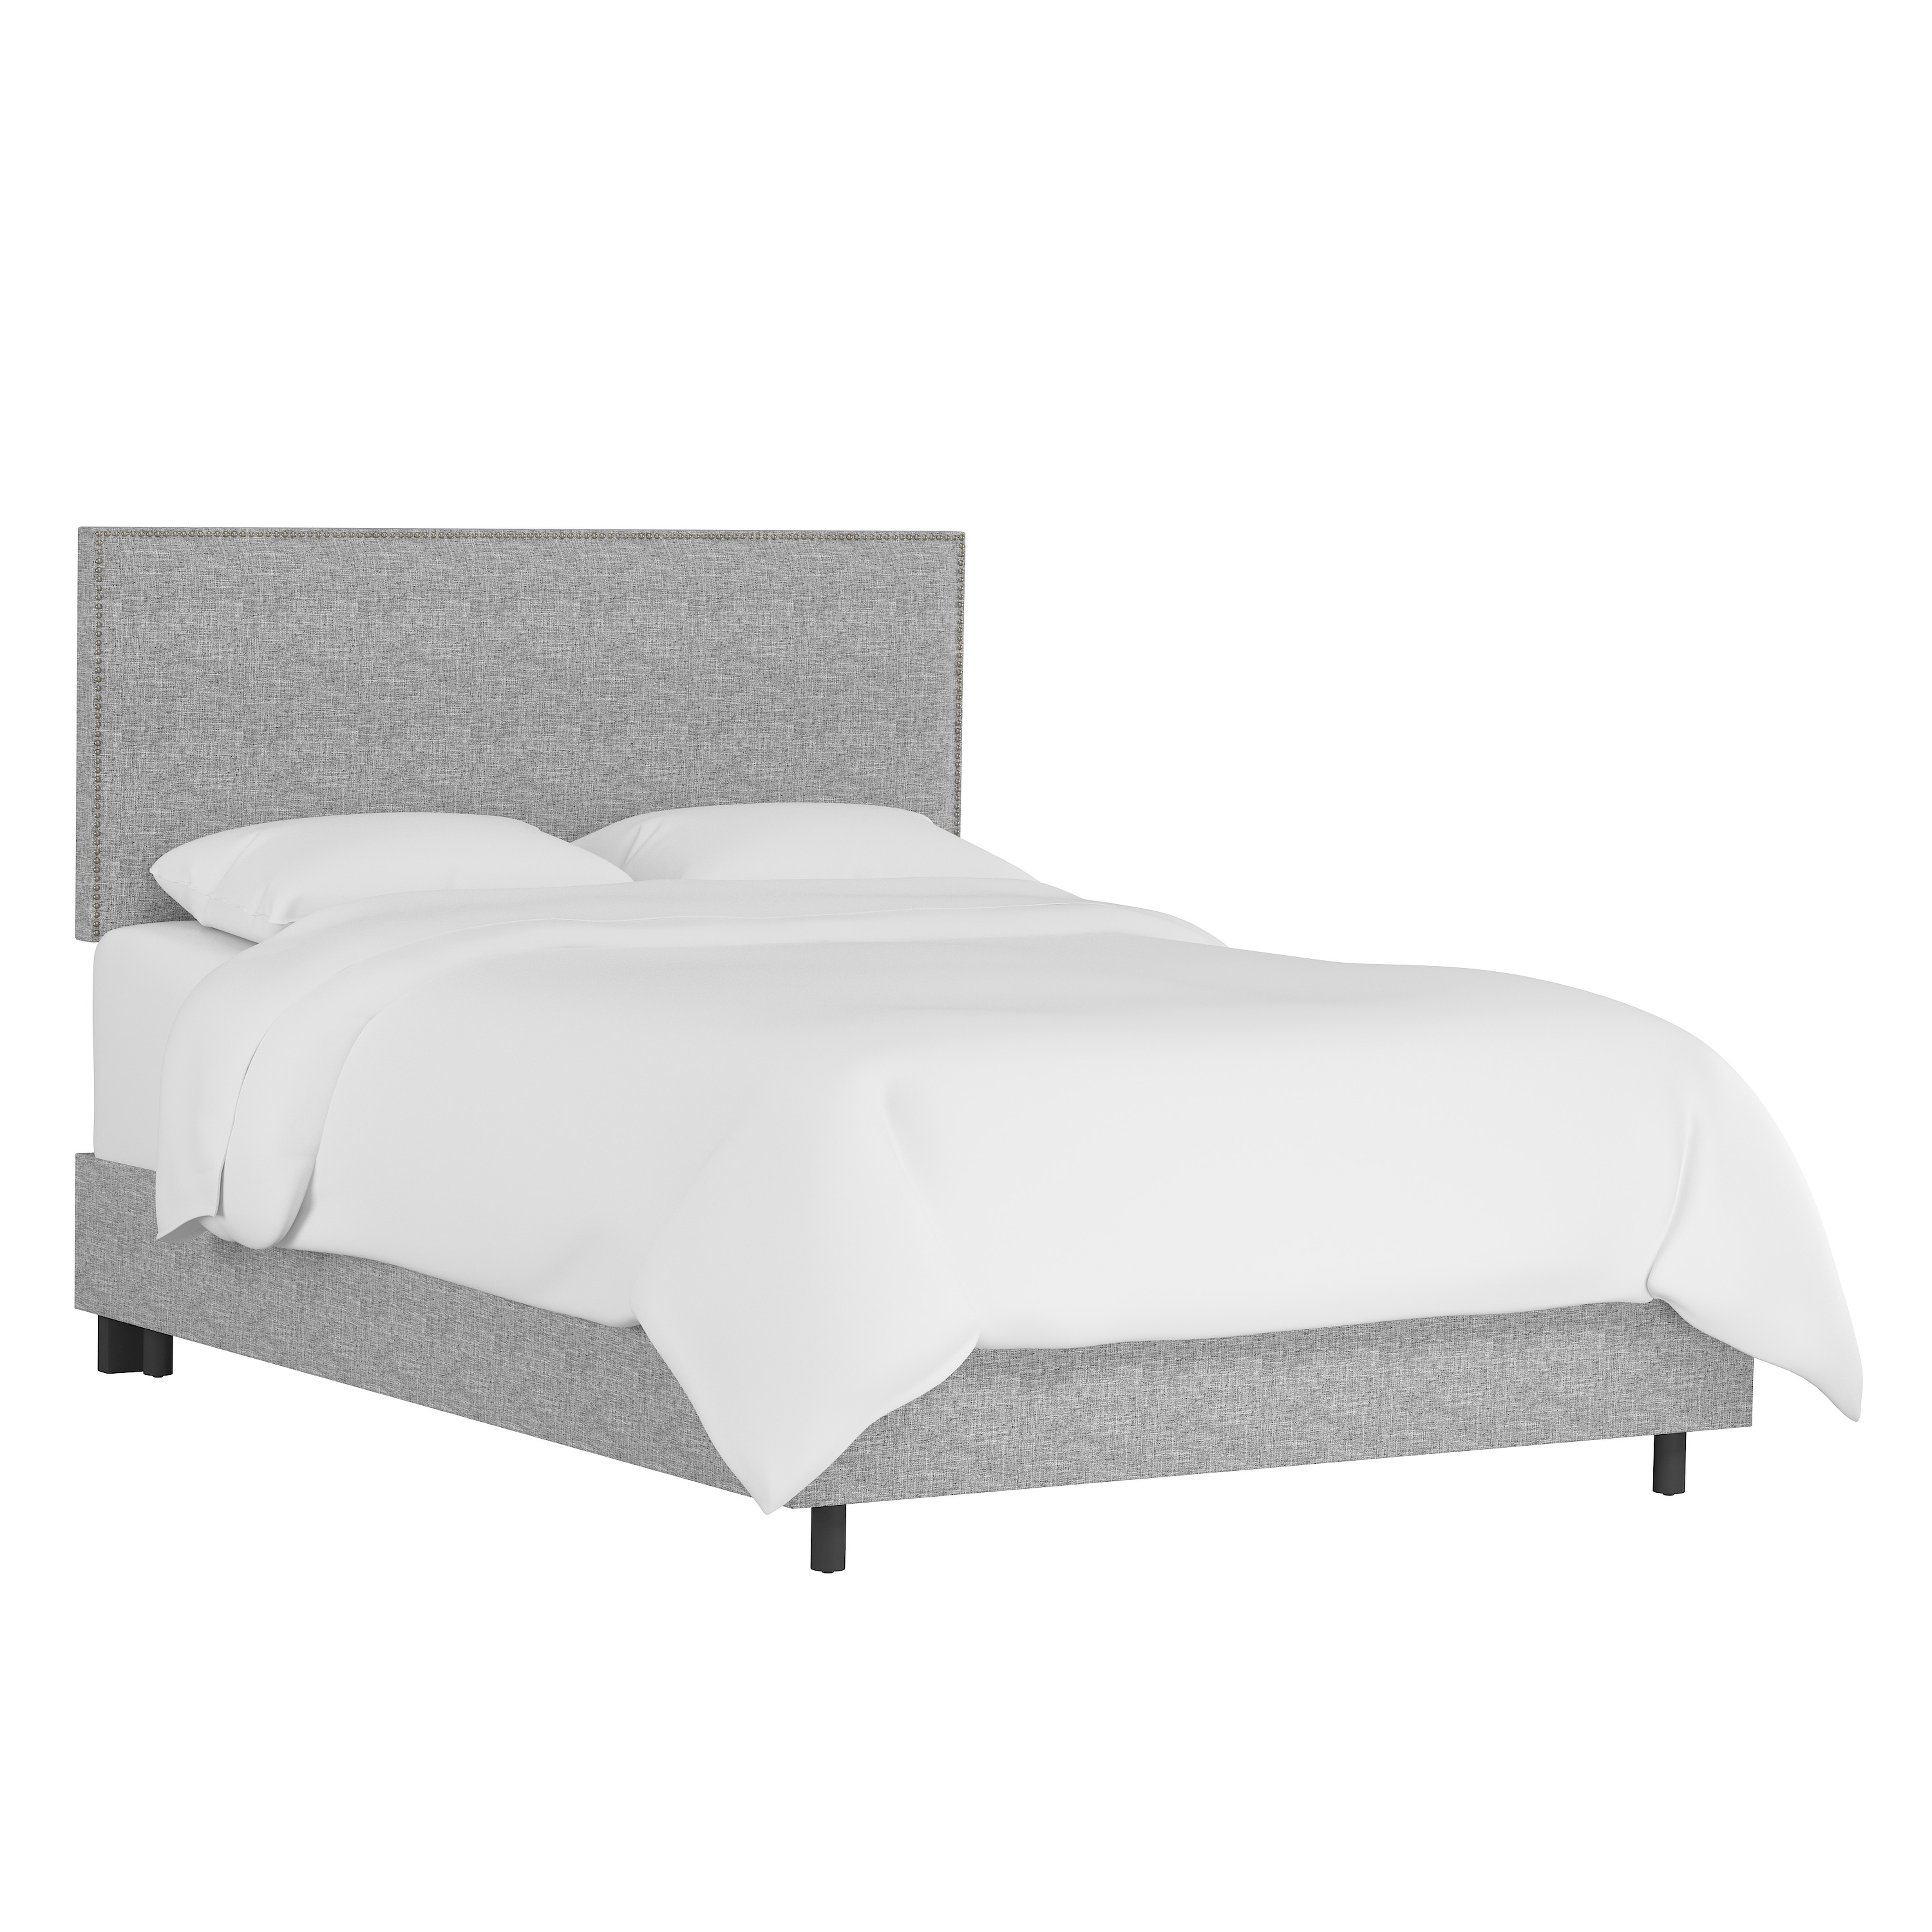 Ellsworth Bed, Queen, Pumice, Pewter Nailheads - Cove Goods